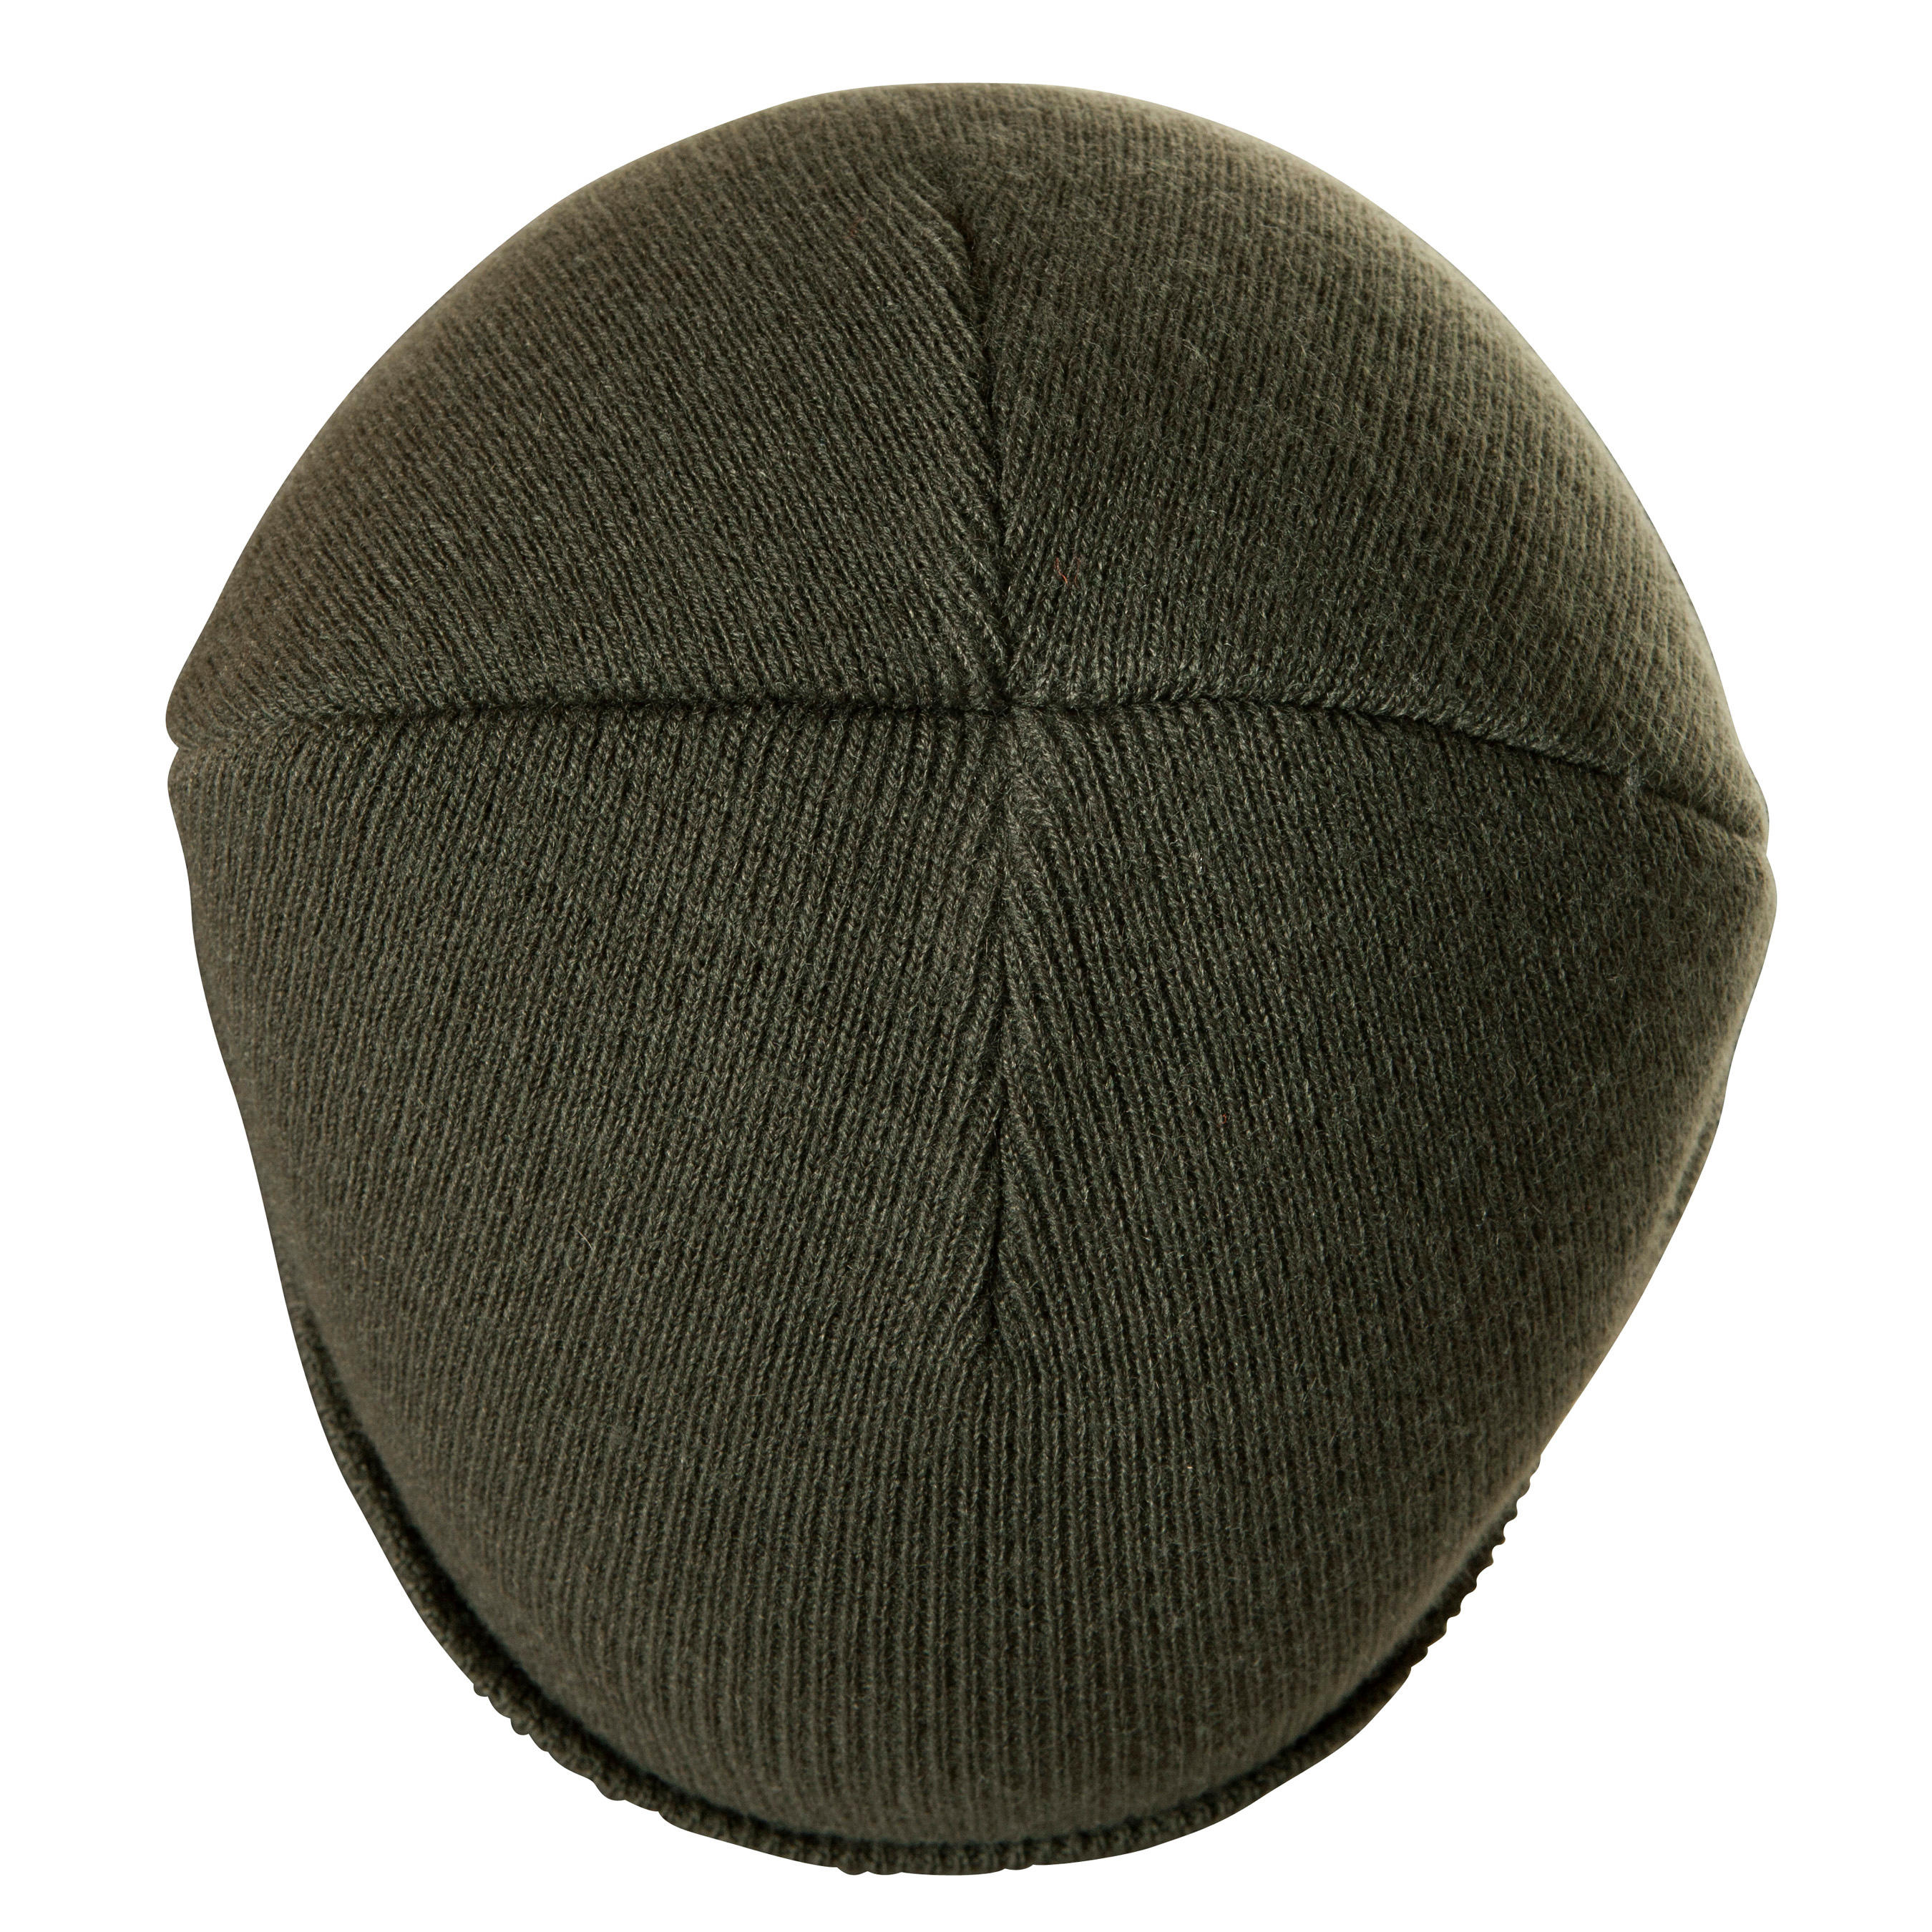 300 Warm Knitted Hunting Hat - Green - SOLOGNAC